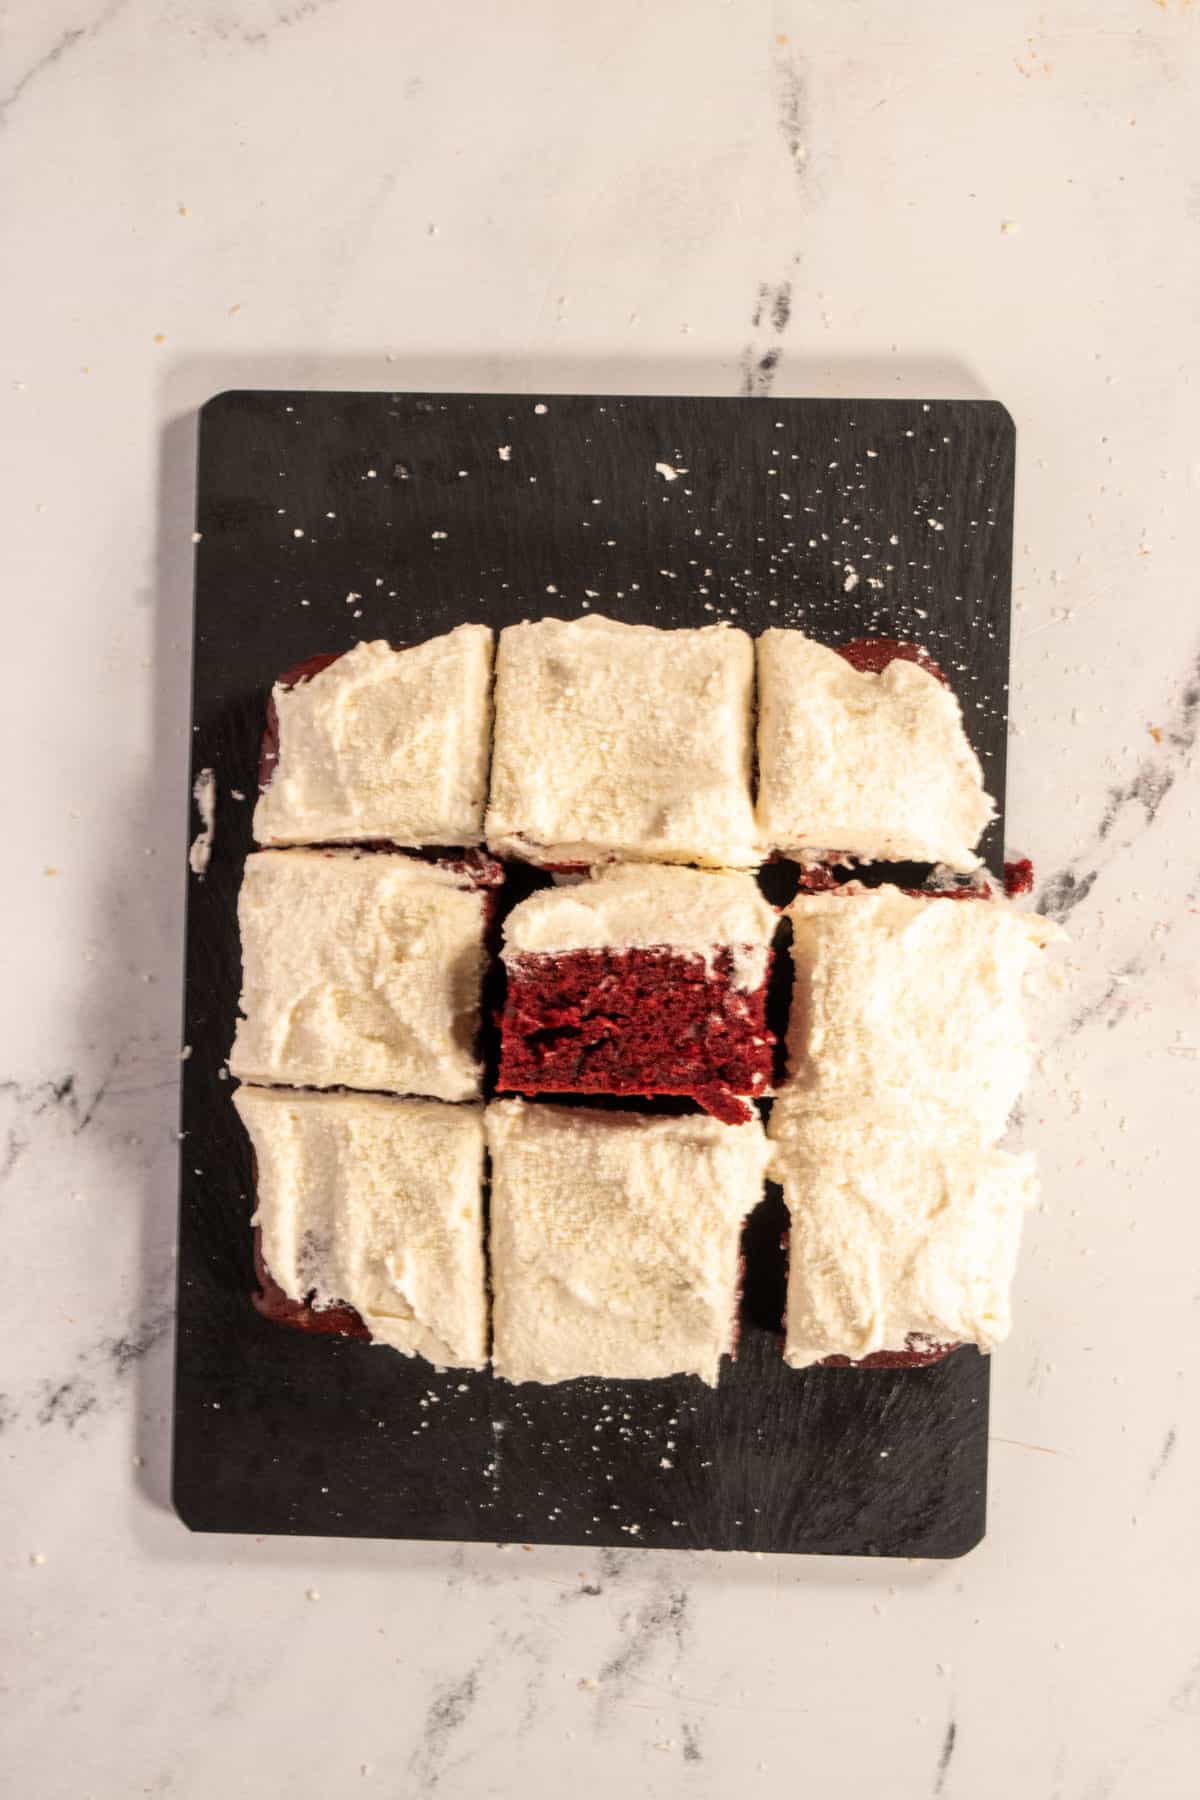 Nine slices of cake on a black serving board forming a square. The cake in the centre has been placed onto its side. 